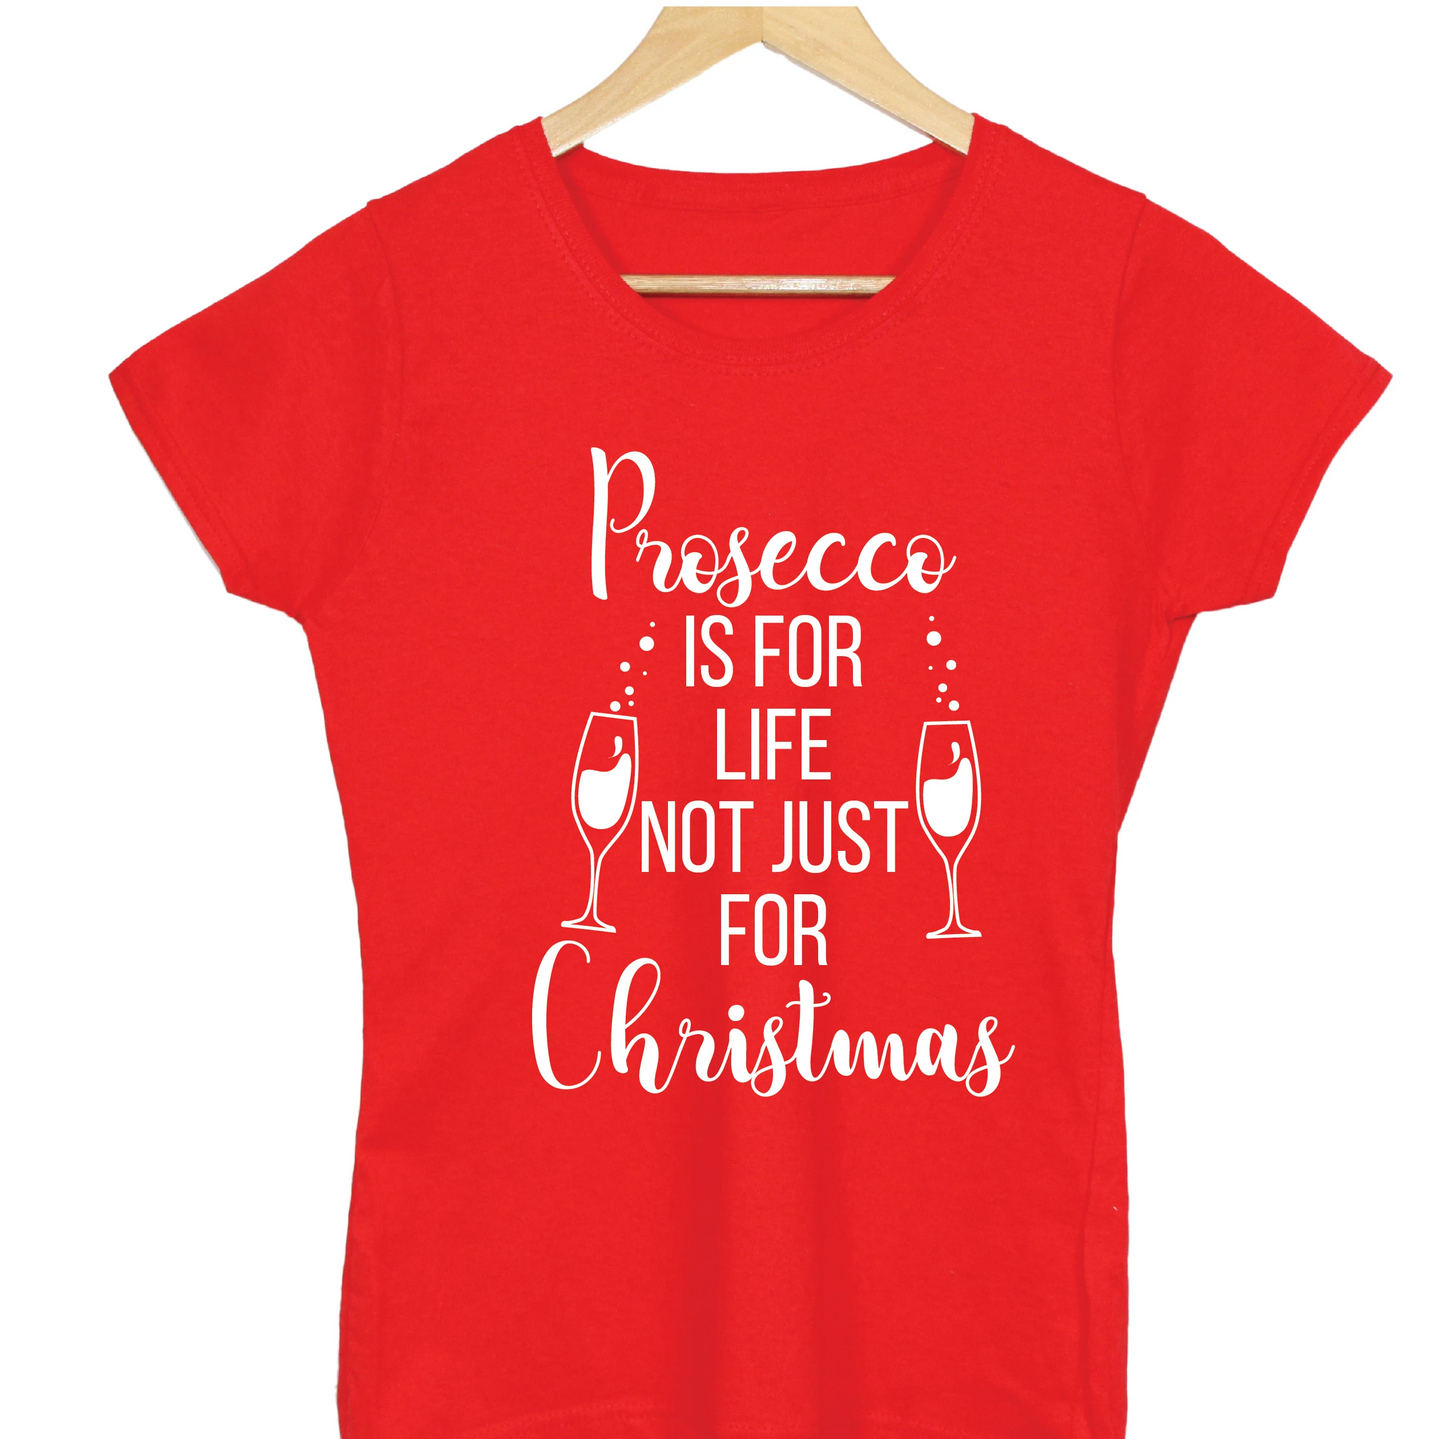 Prosecco Is For Life Not Just For Christmas T-shirt